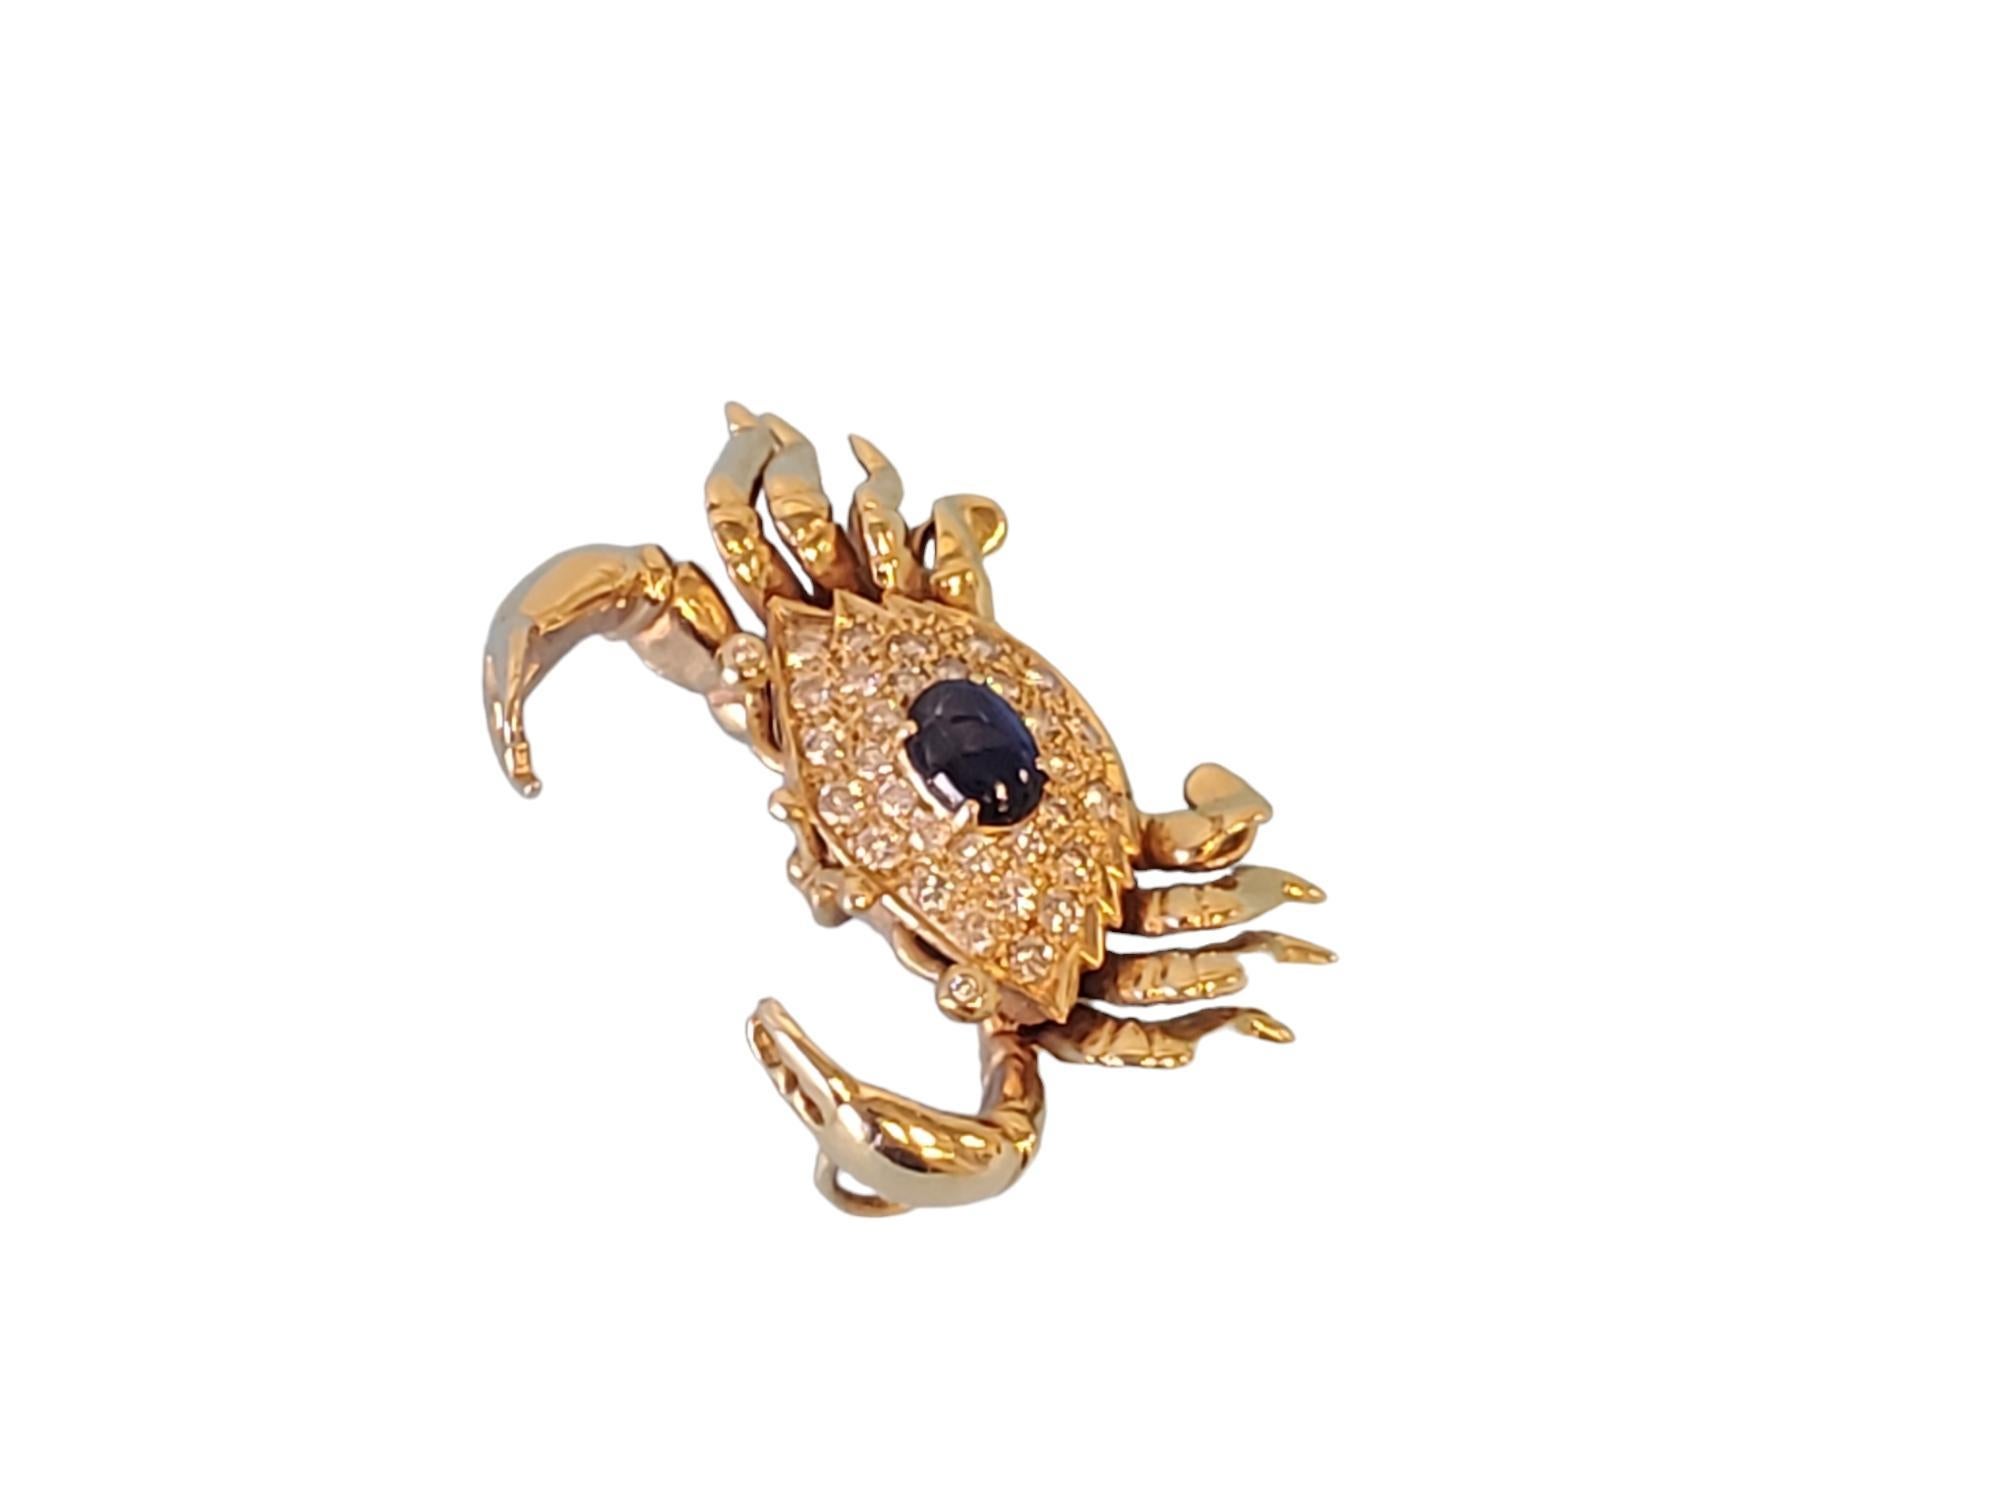 Vintage Crab Slide Pendant 14k Yellow Gold Diamonds and Blue Sapphire Cabochon In Good Condition For Sale In Overland Park, KS